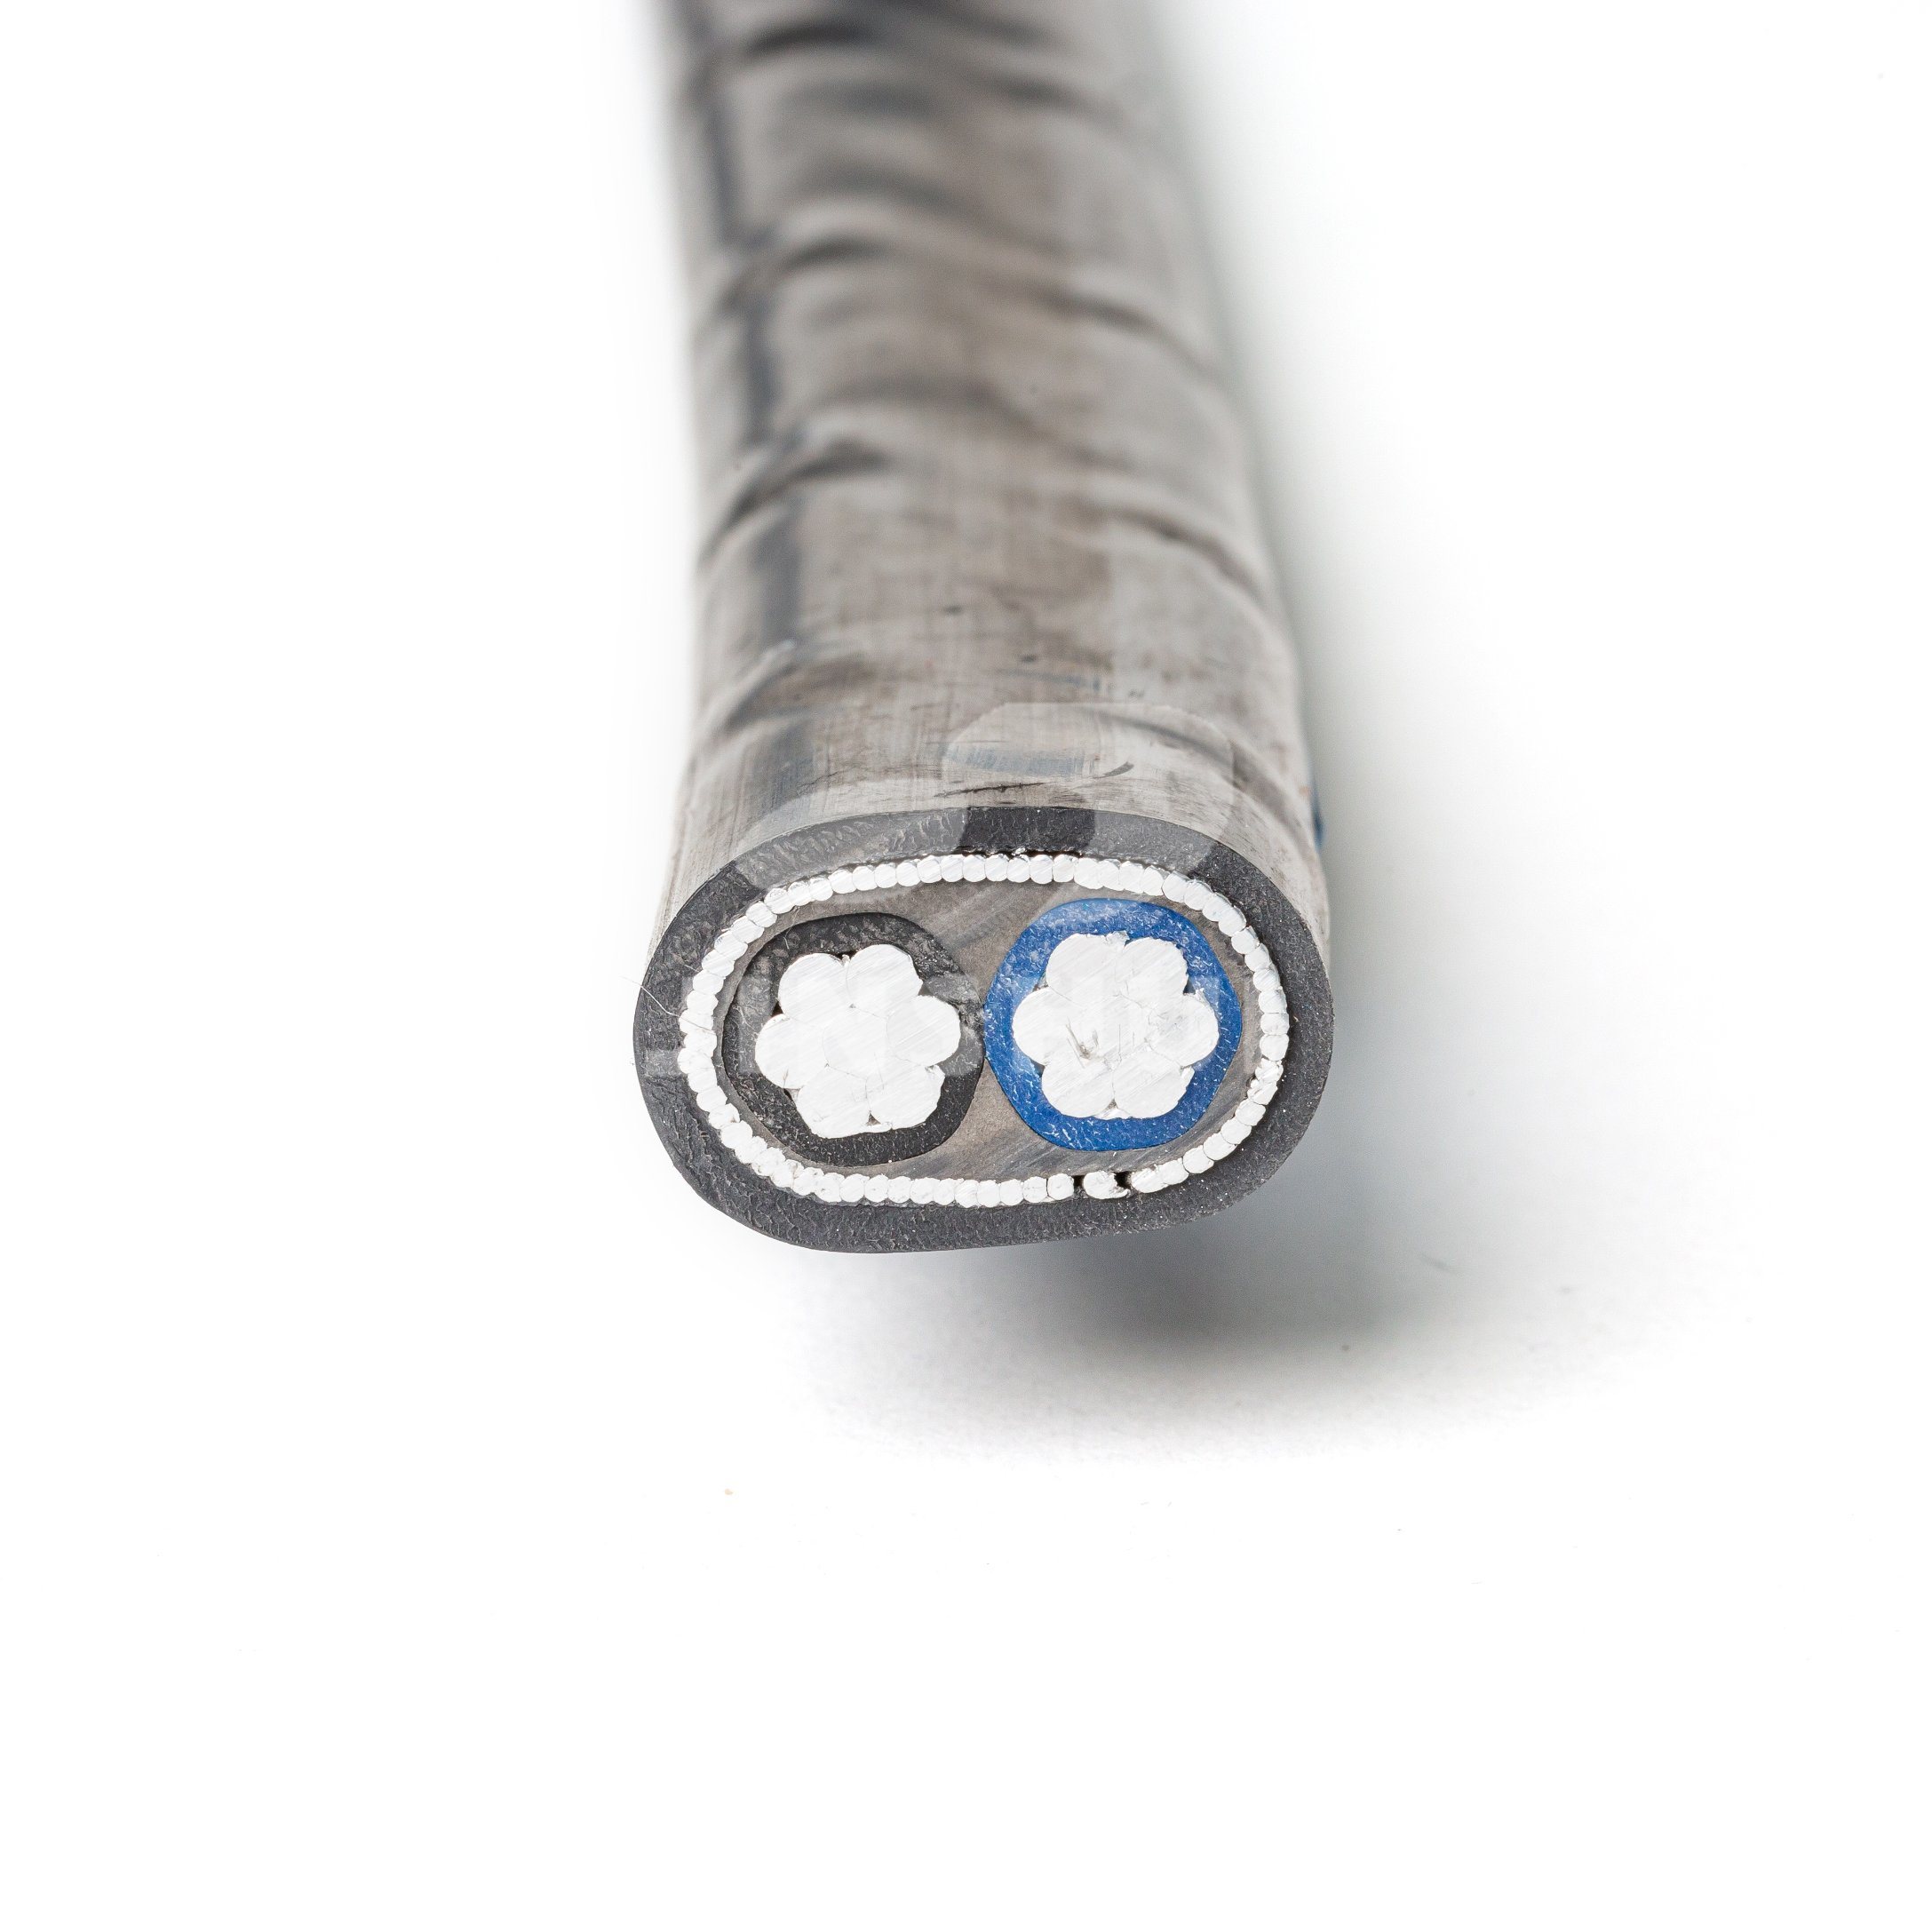 Primary Shielded and Concentric Neutral Power Cable Manufacturer